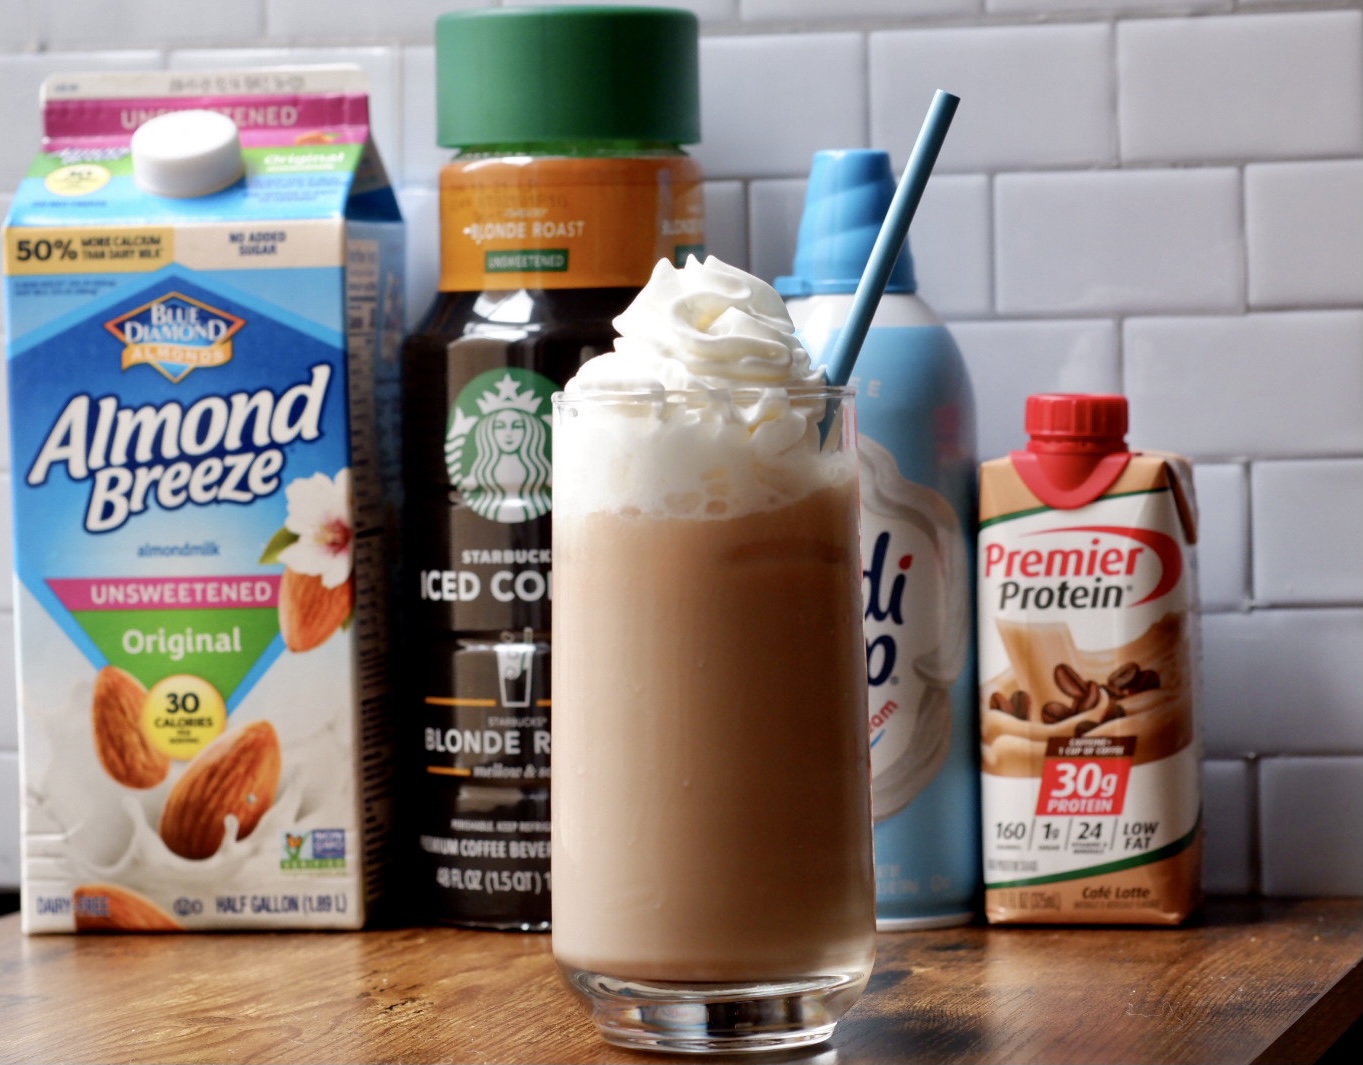 Premier Protein Iced Coffee Recipe 